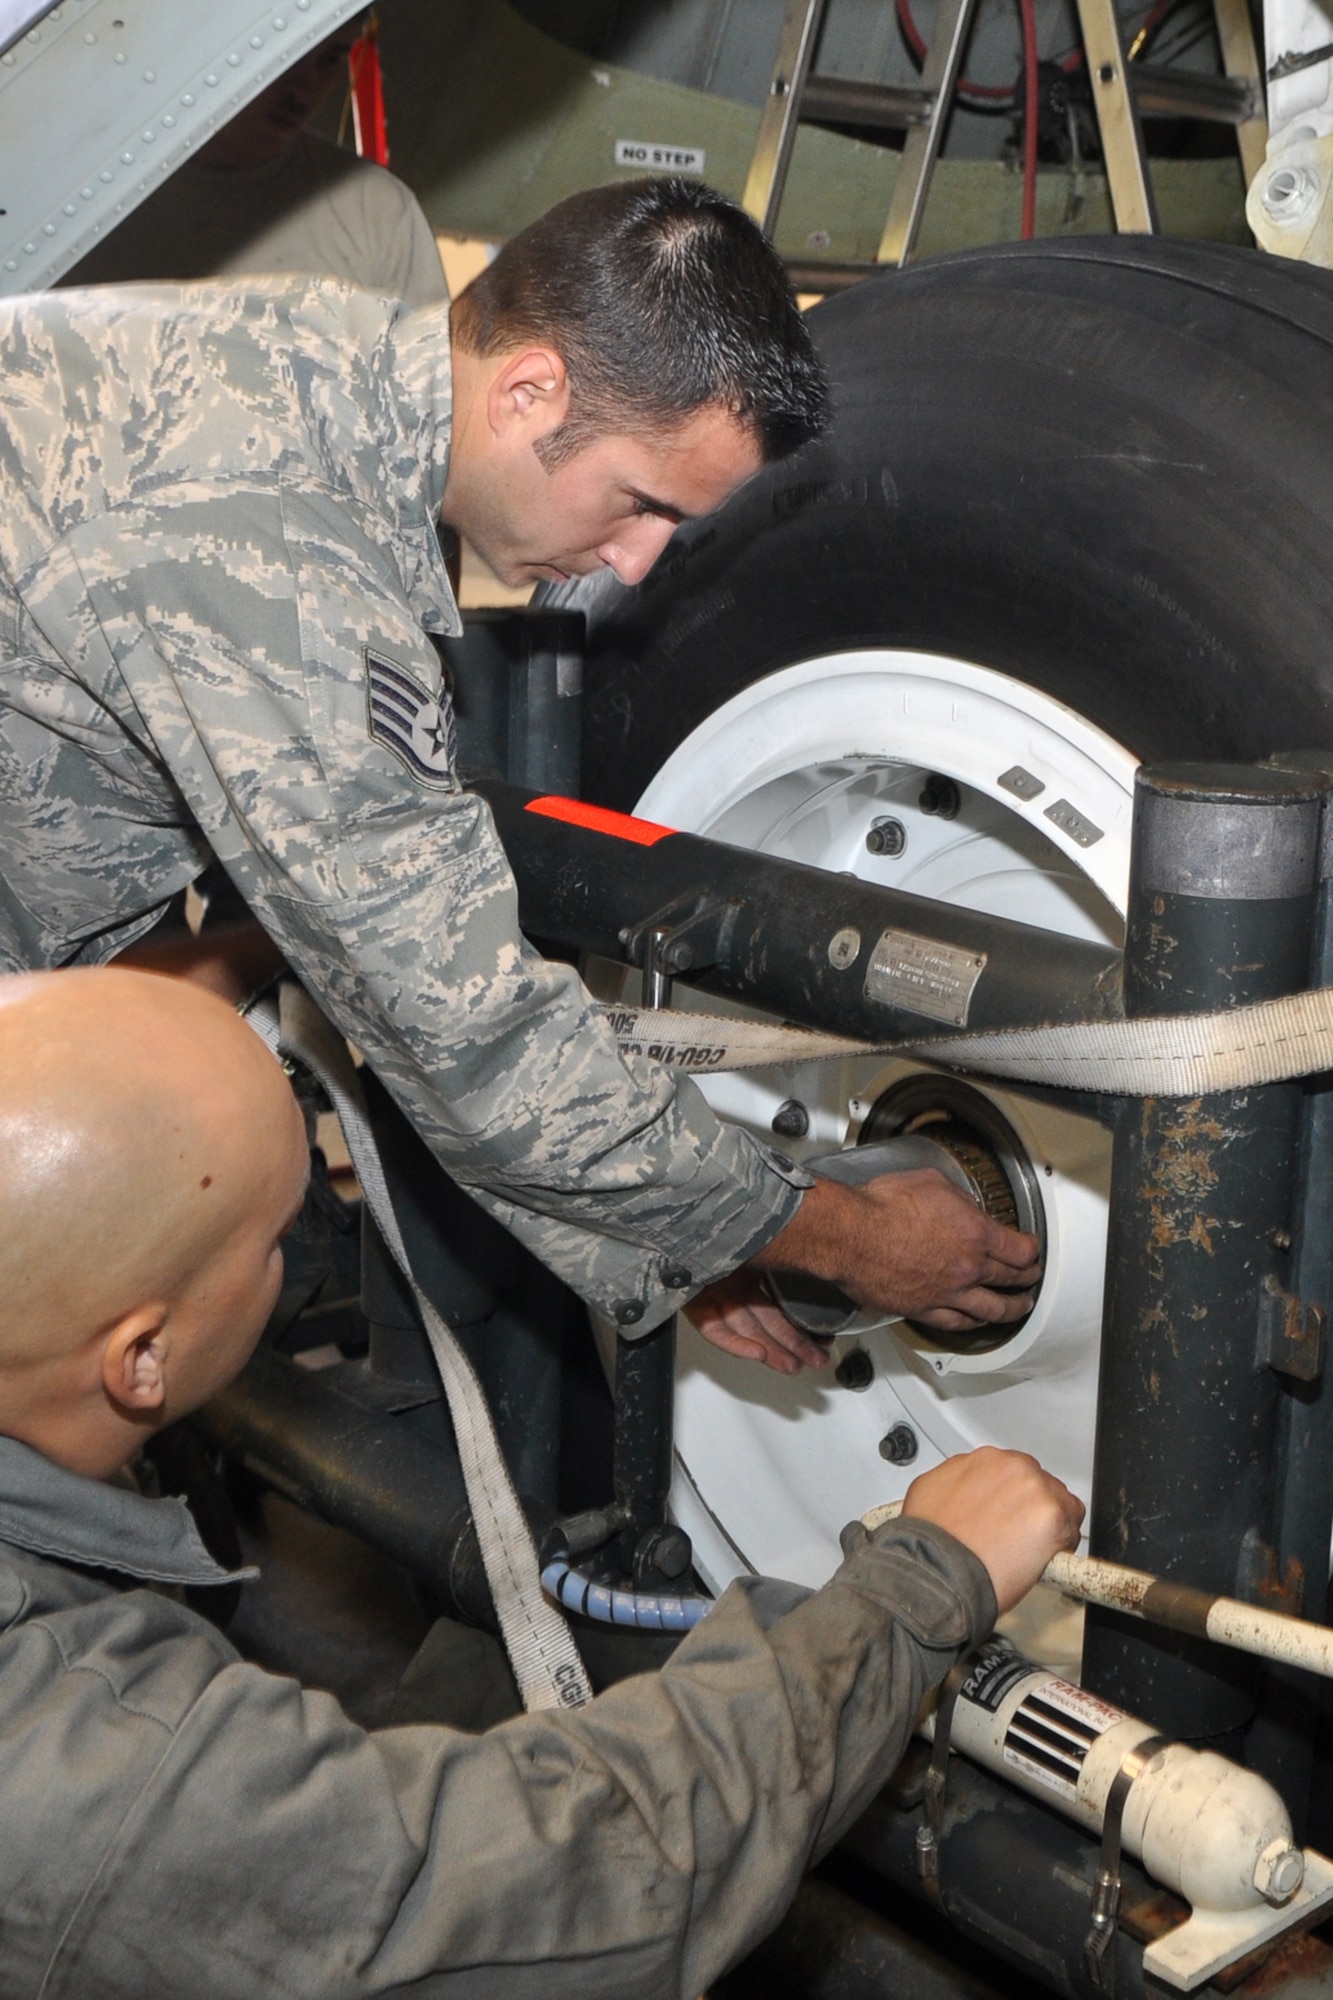 With the help of Airman 1st Class Anthony Del Rio, Staff Sgt. Byron Landon, who is a repair and reclamation technician, pulls a main landing gear wheel bearing in preparation of removing a wheel on a B-52 Stratofortress for a brake inspection at the phase hangar at Barksdale Air Force Base, La., Nov. 9, 2011. Landon, who is a Reservist assigned to the 707th Maintenance Squadron and Del Rio, who is an Active Duty Airman assigned to the 2nd Maintenance Squadron, work side by side as part of the Total Force Enterprise, which combines both Active Duty and Reserve components working together on the same aircraft.  (U.S. Air Force photo by Master Sgt. Jeff Walston)

